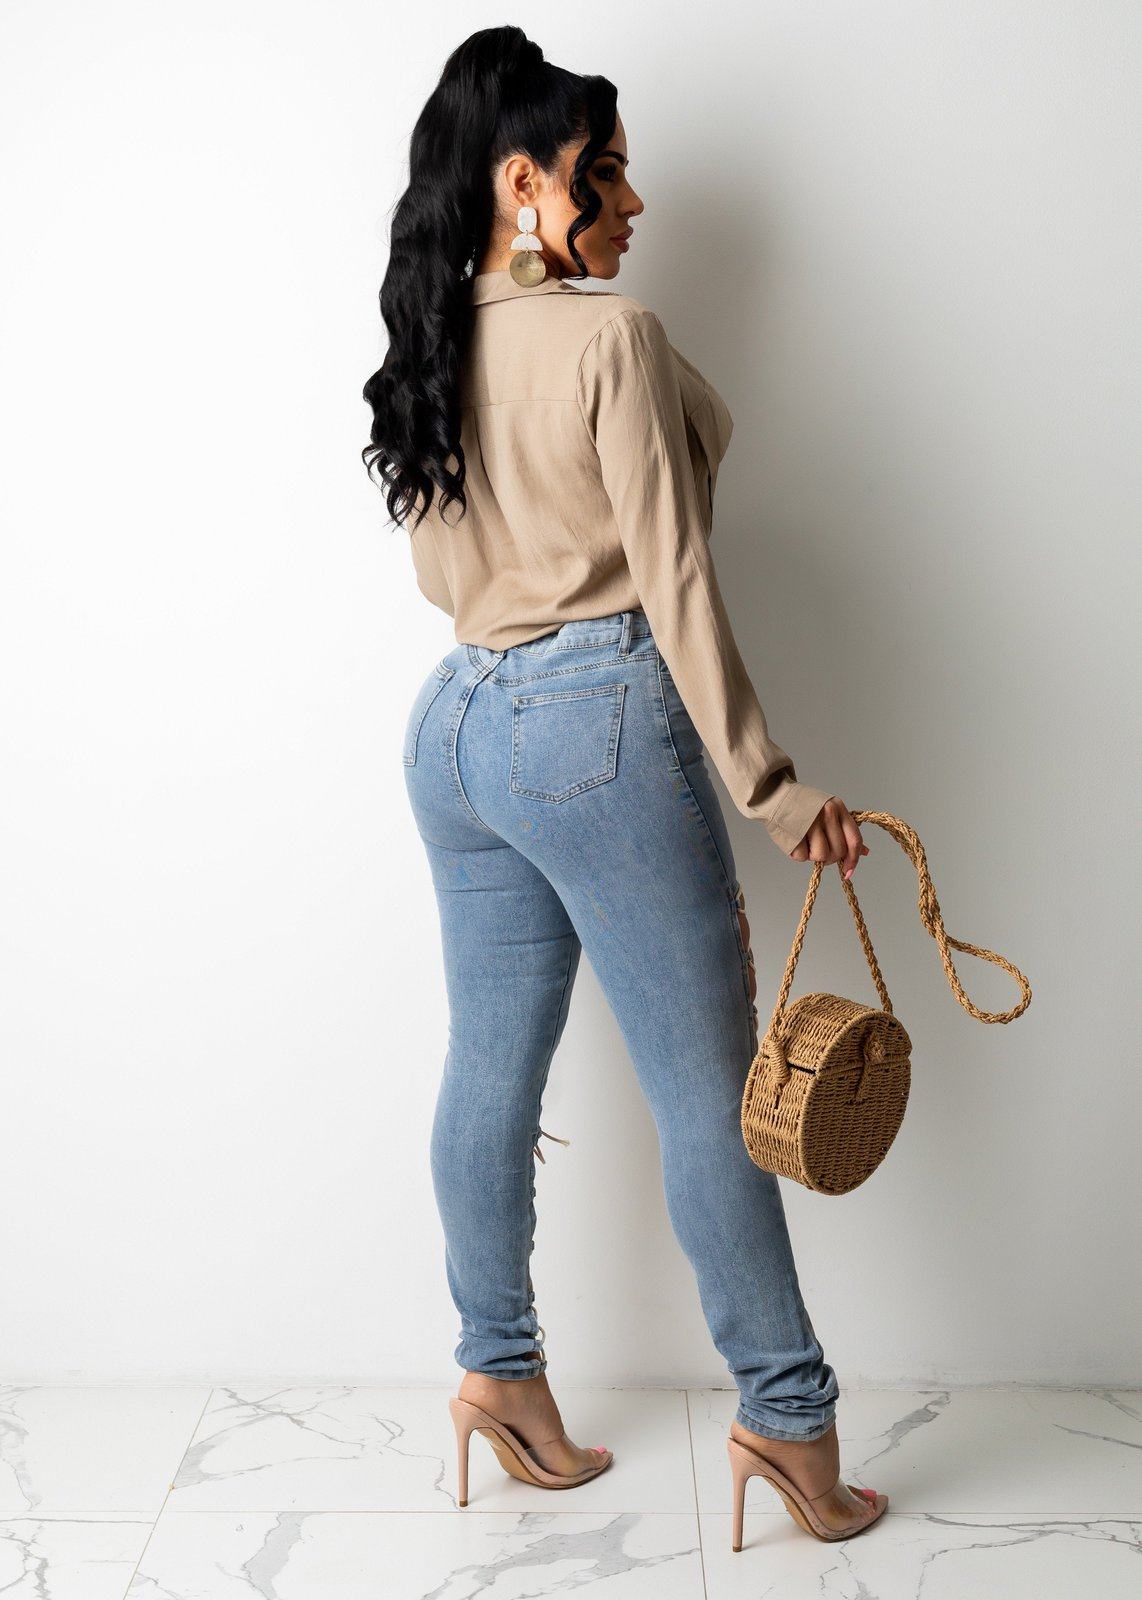 Koel Betrokken linnen Buy Lace-Up Denim Jeans For Women | Thirst Couture – Thirst Couture Boutique